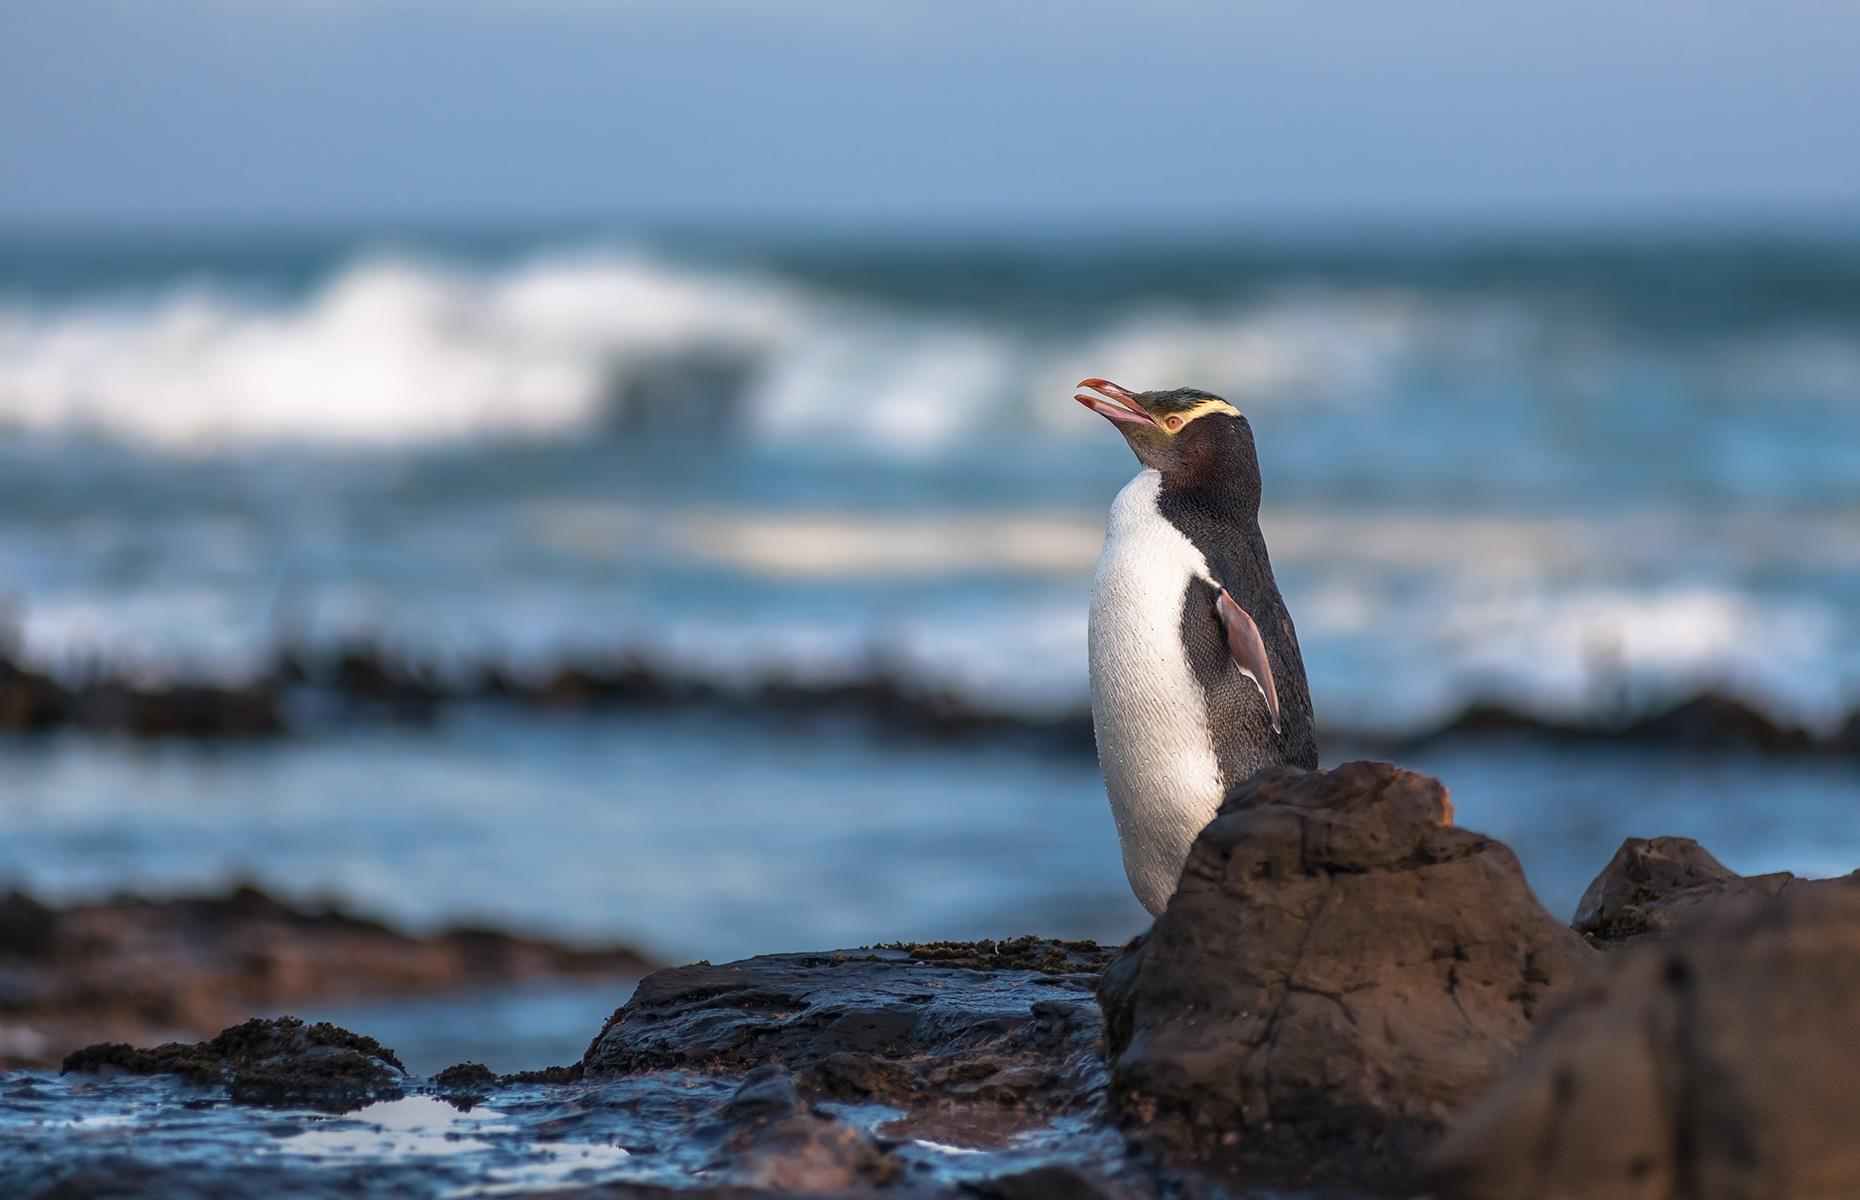 <p>The world’s rarest species of penguin, the yellow-eyed penguin (Megadyptes antipodes), or hoiho, can be spotted at <a href="https://www.doc.govt.nz/parks-and-recreation/places-to-go/otago/places/catlins-coastal-area/curio-bay-porpoise-bay/">Curio Bay</a> in The Catlins. The southeast corner of the South Island is home to these protected birds and it’s estimated there are only around 6,000 to 7,000 of them left in the wild in New Zealand.</p>